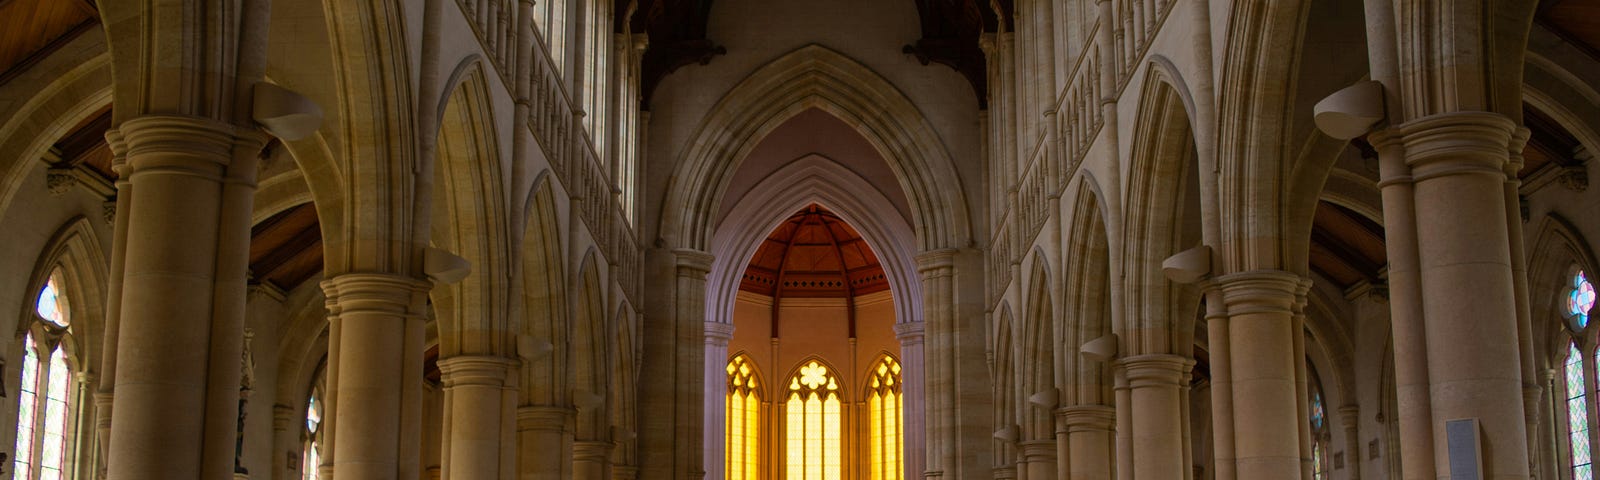 View from the back of a church with lighted windows.